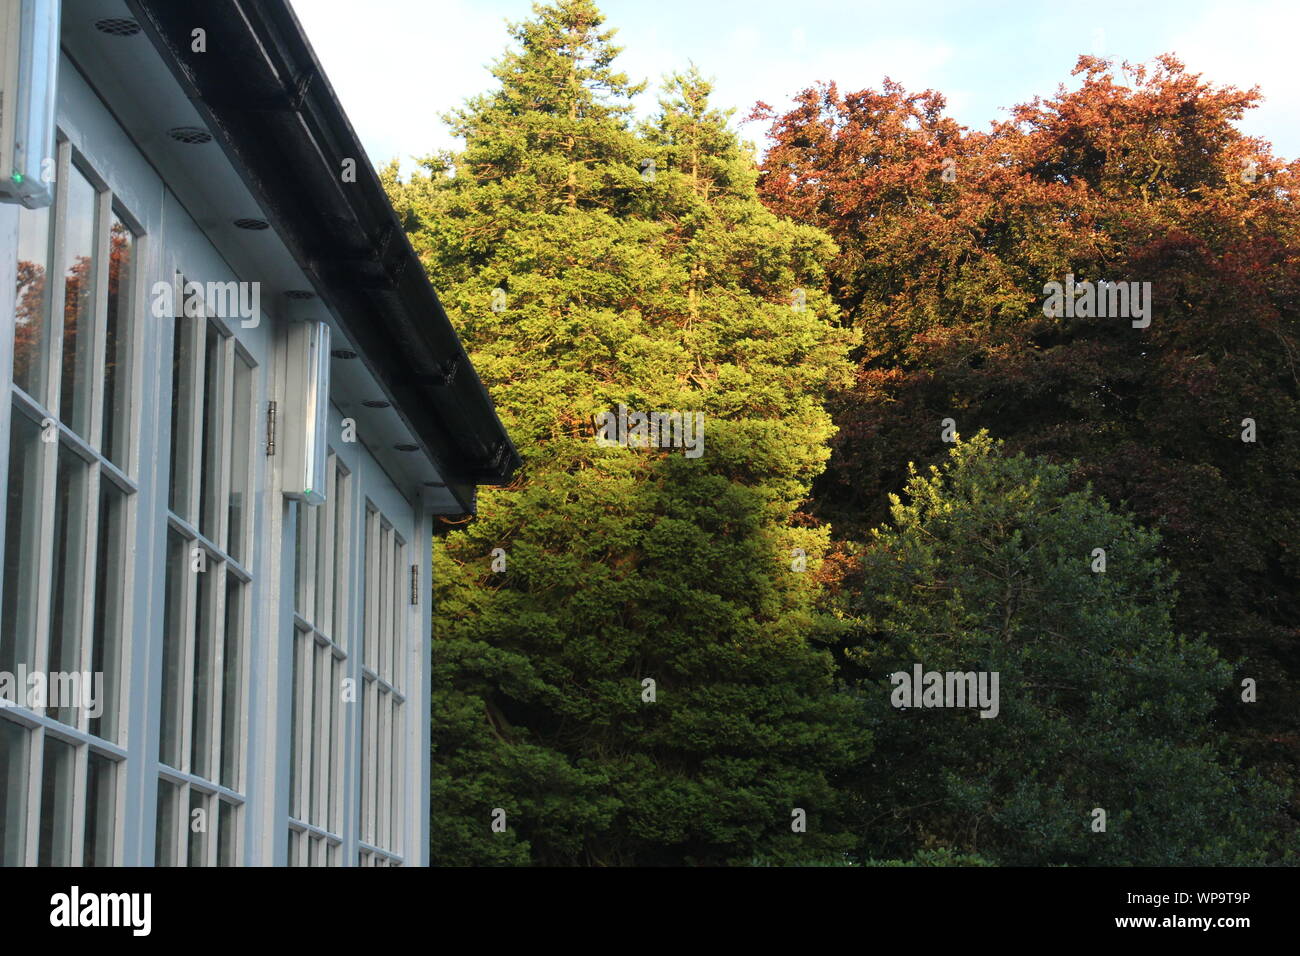 Big green and red trees in the evening sunlight behind a white conservatory Stock Photo